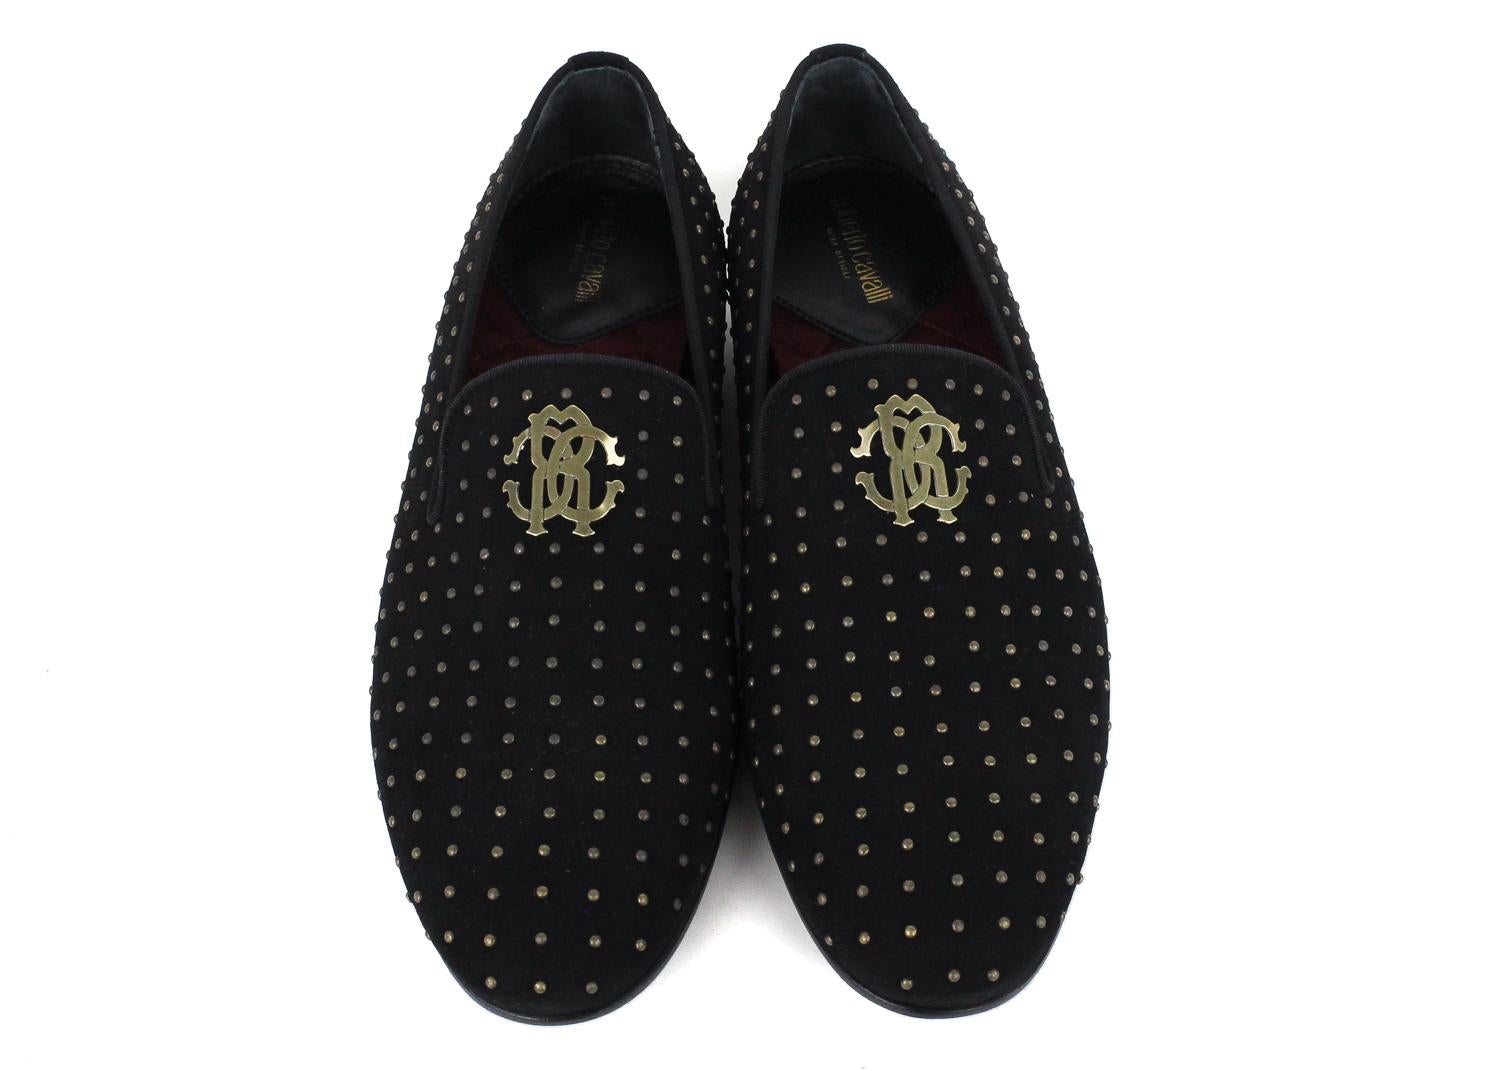 Roberto Cavalli Black Suede Gold Studded Loafers. These loafers are detailed with antique gold toned metal studs and the iconic Roberto Cavalli logo. These dress up any casual outfit.



100% Suede 
Slip On 
Gold Tone Metal Studs
Gold Tone Metal